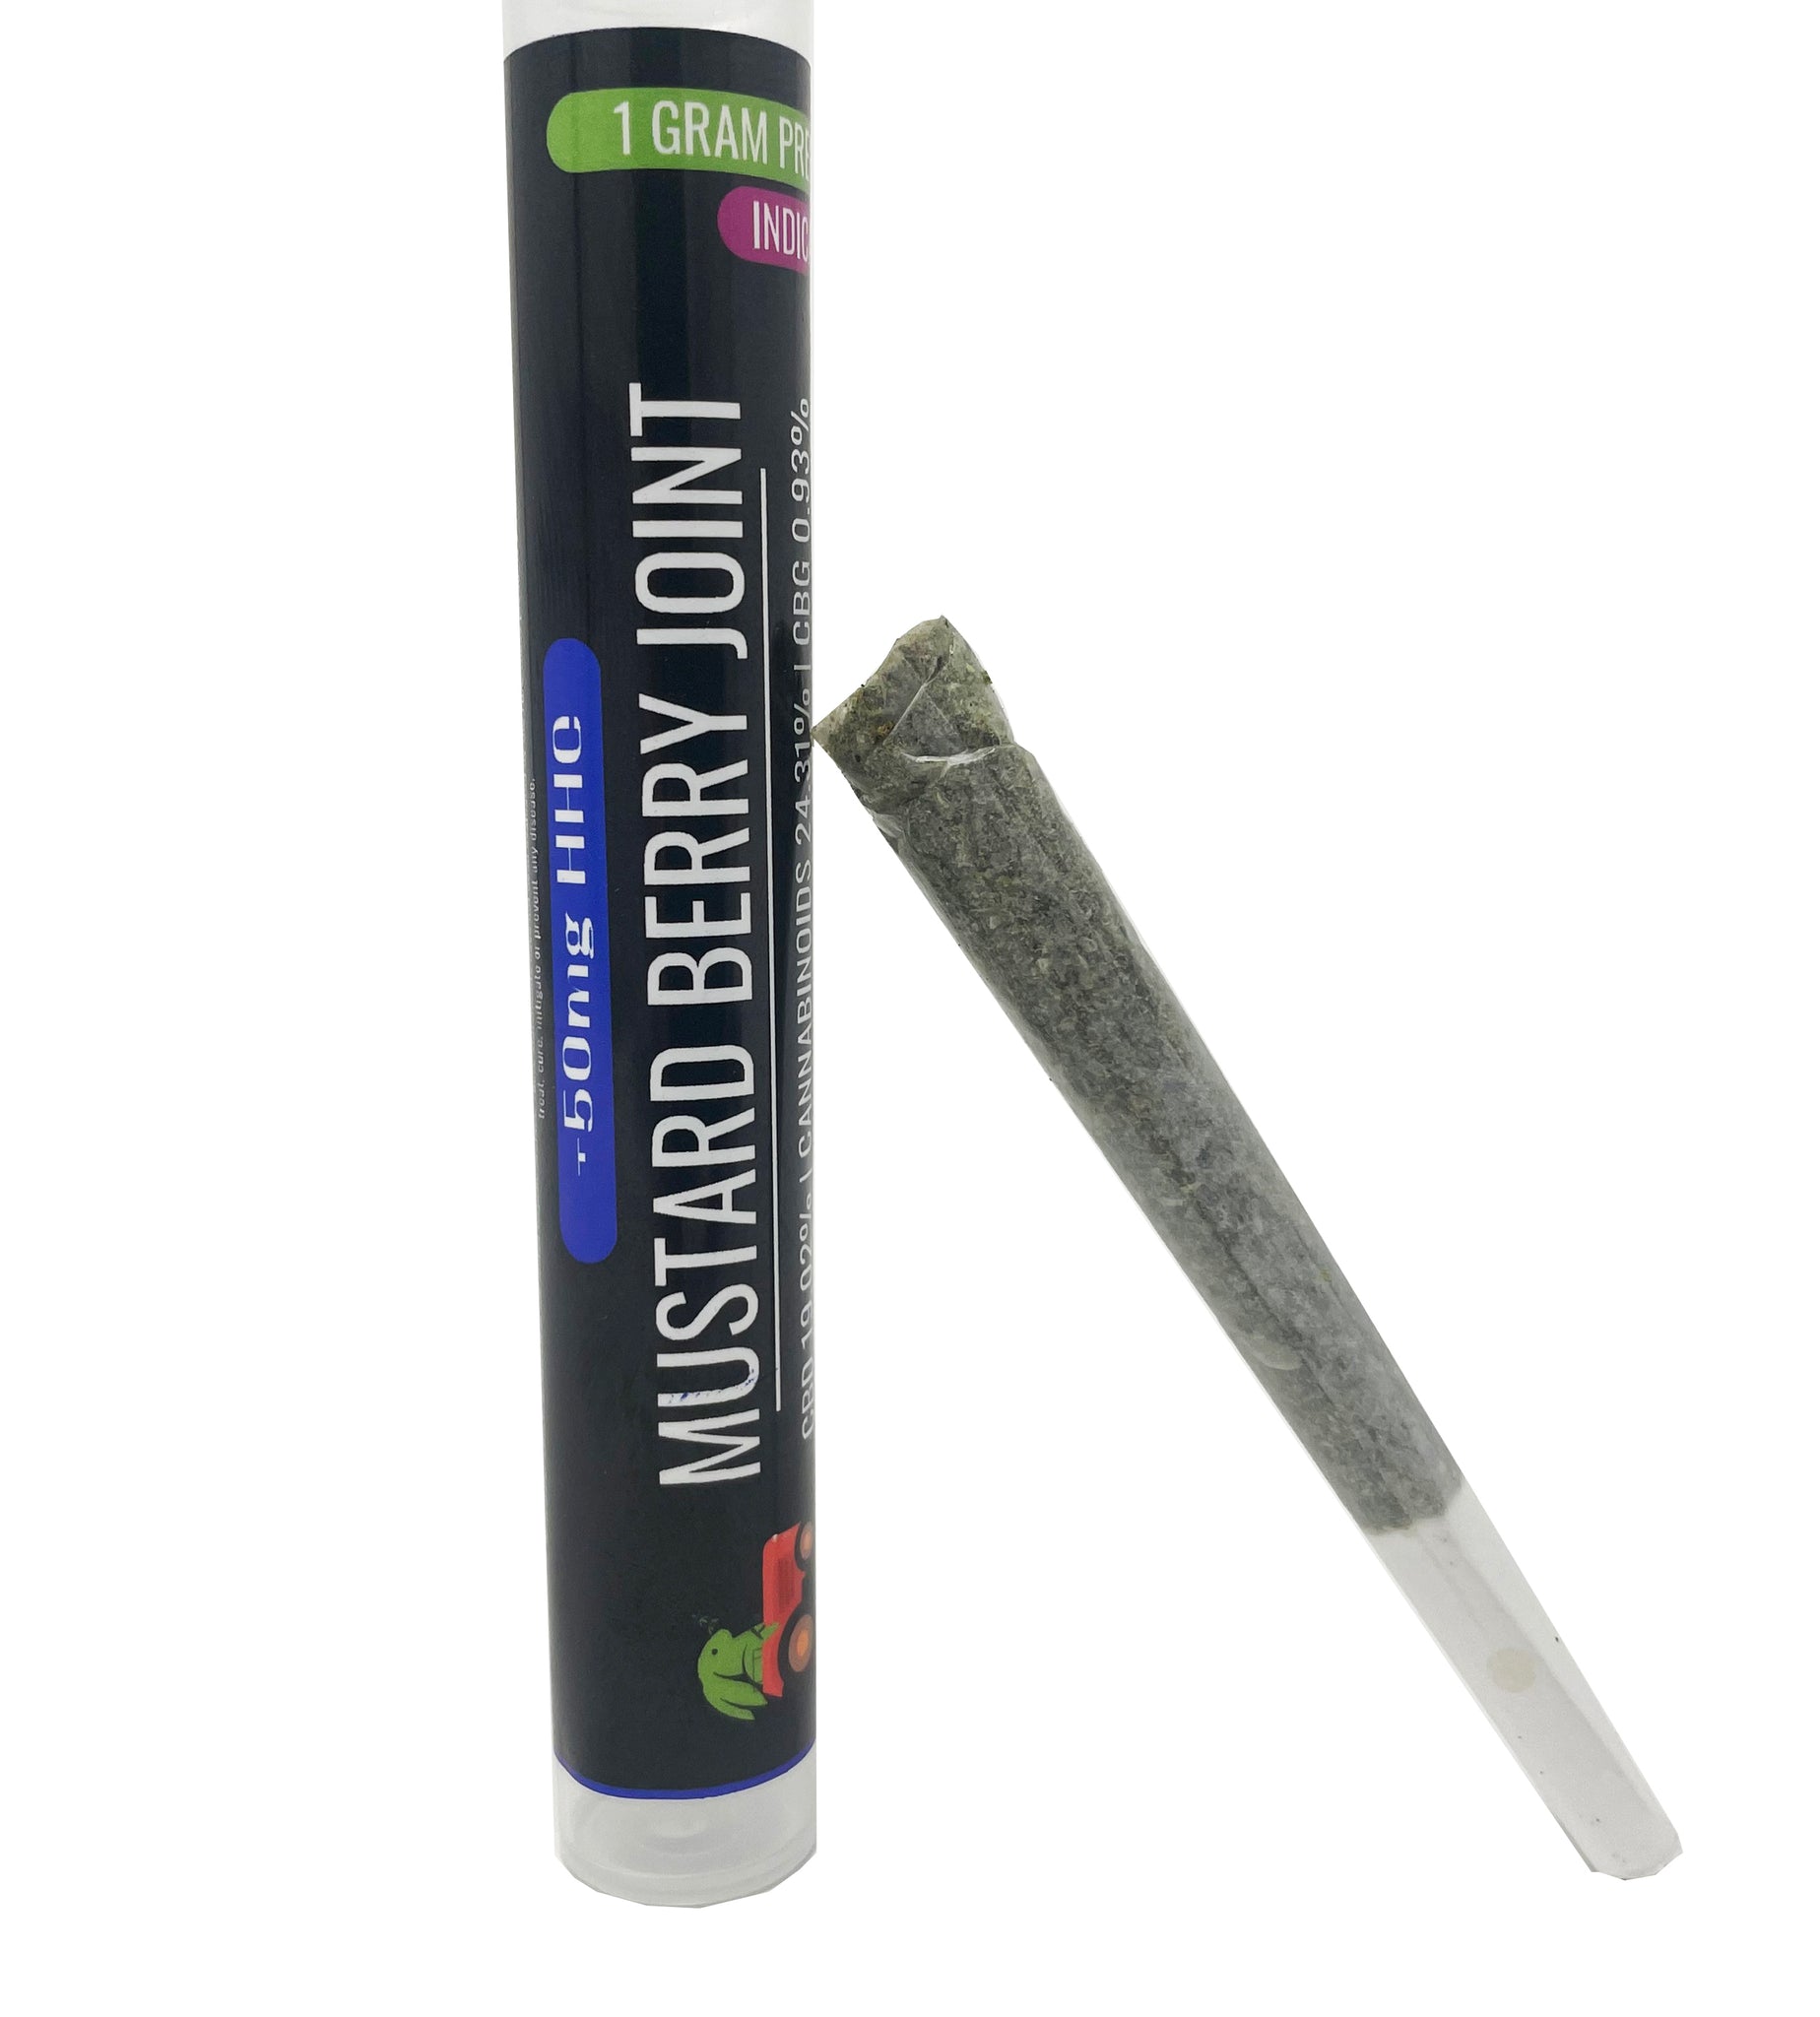 50mg  king size hhc pre rolled joint